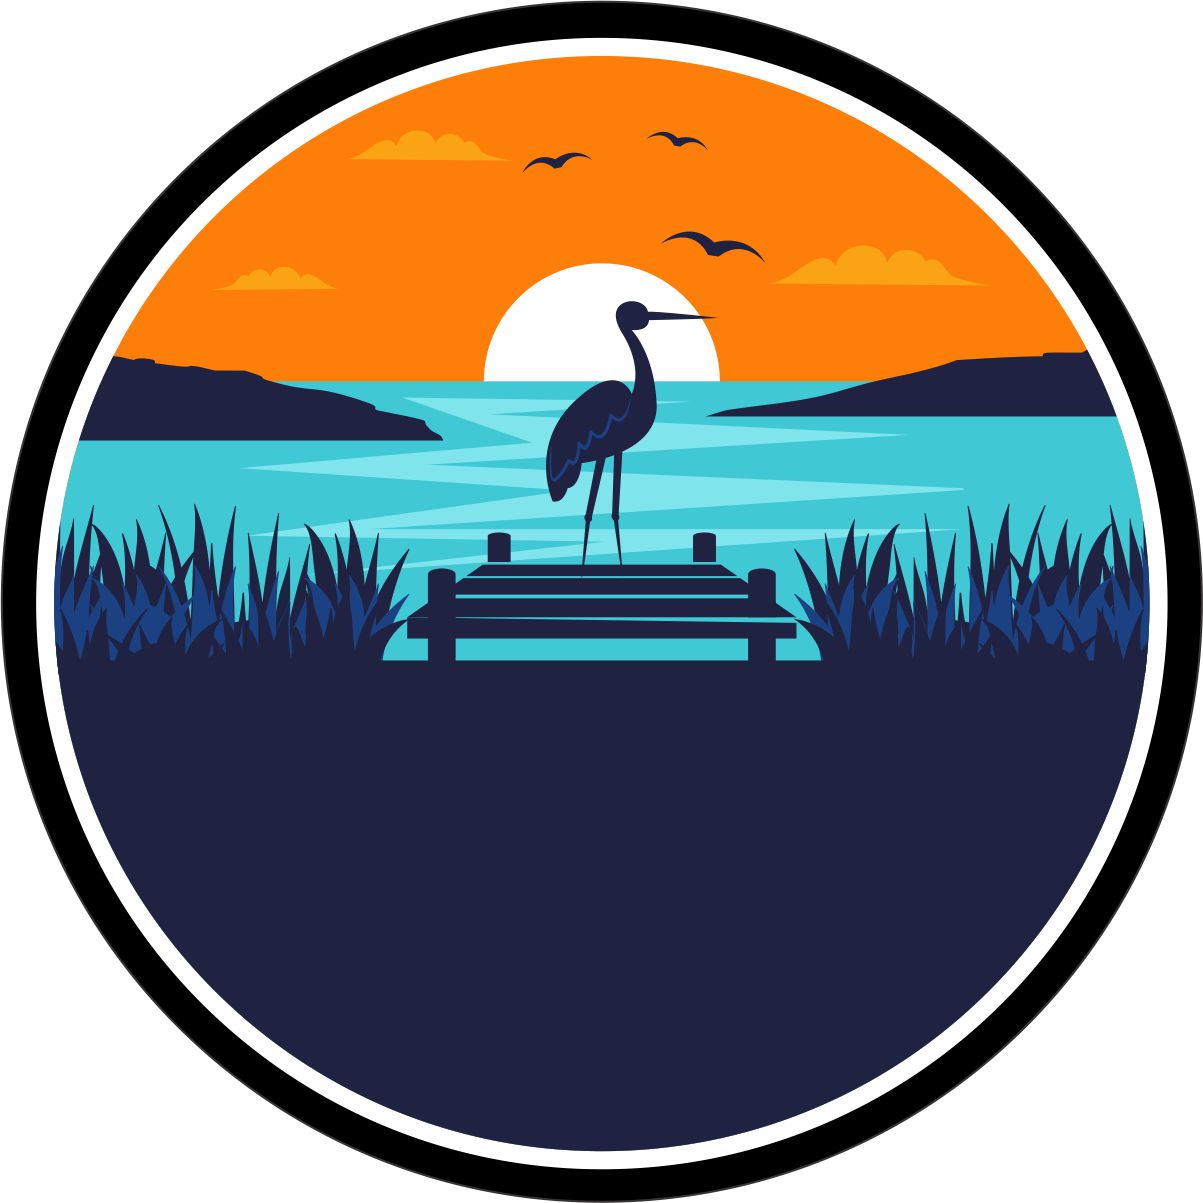 Picturesque scene of a coastal landscape with a sea bird or heron sitting near a dock with the sunsetting. 